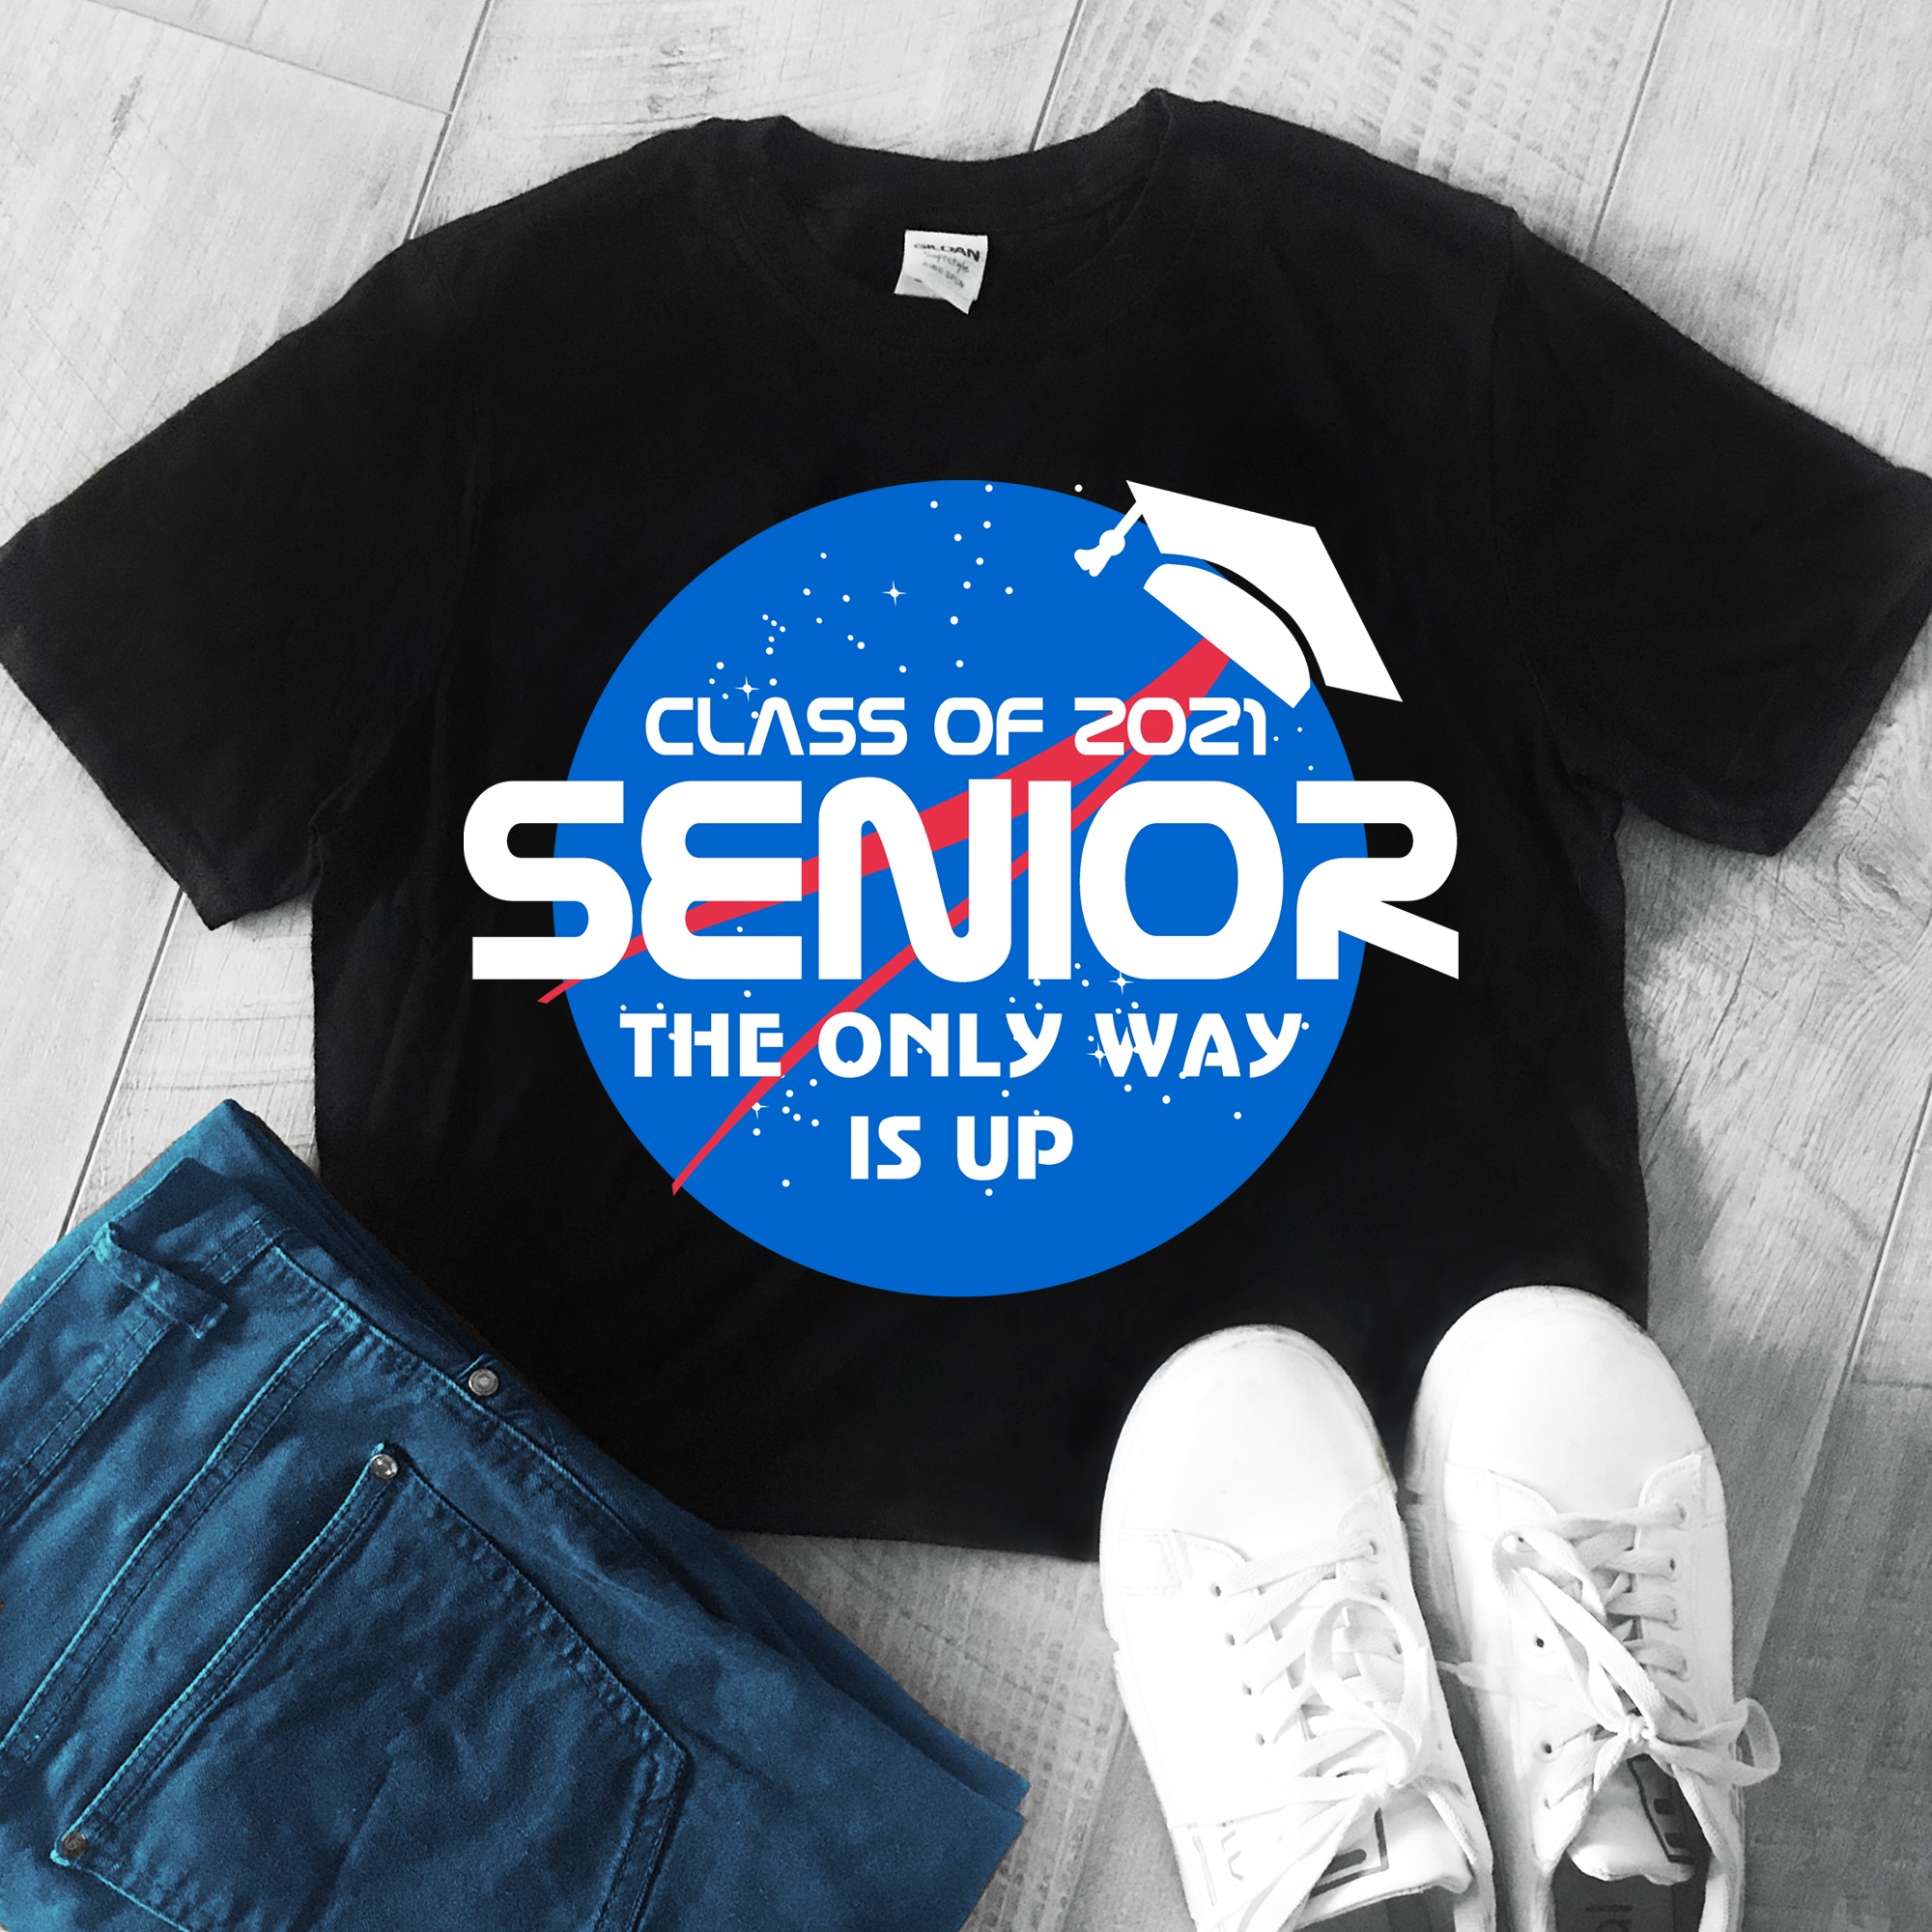 Class of 2021 senior the only way is up - Future of the Earth